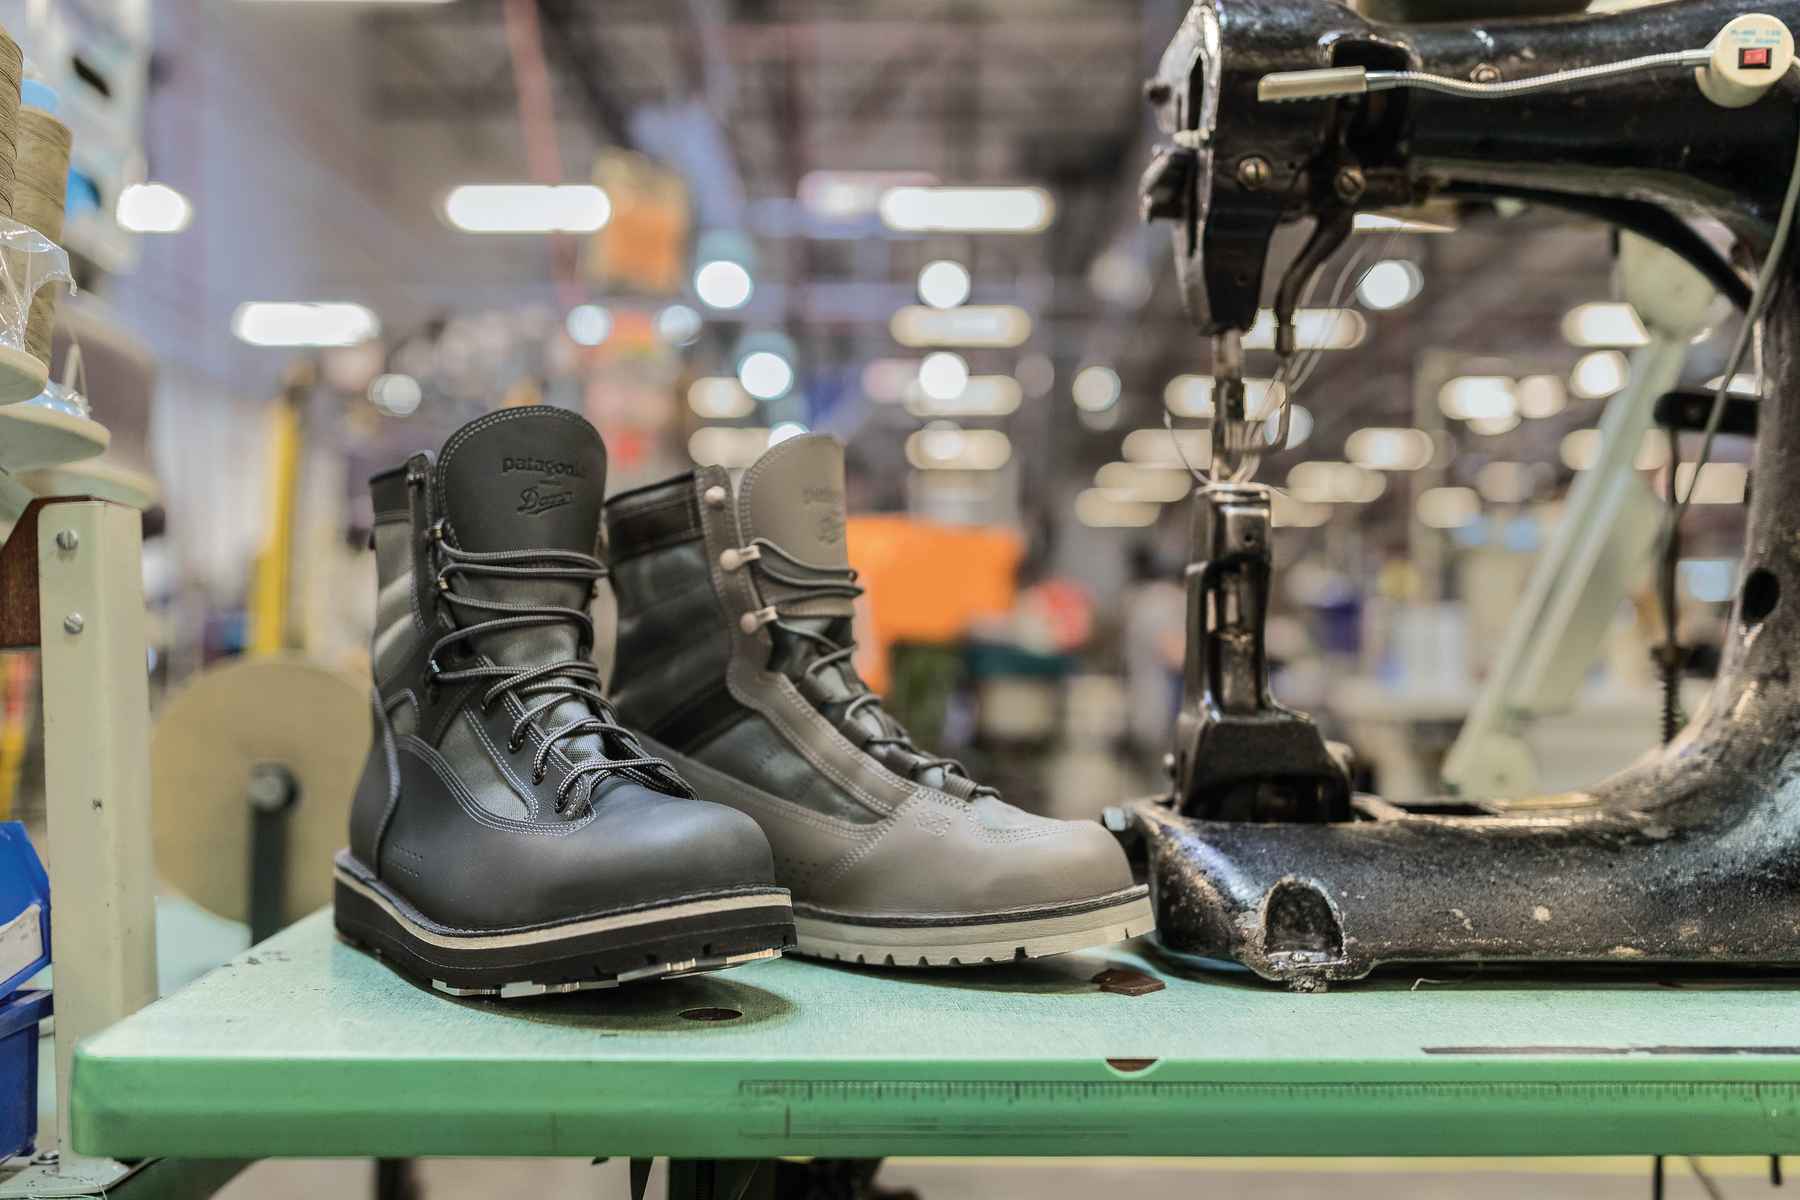 Patagonia's new Foot Tractor wading boots take top honors at IFTD